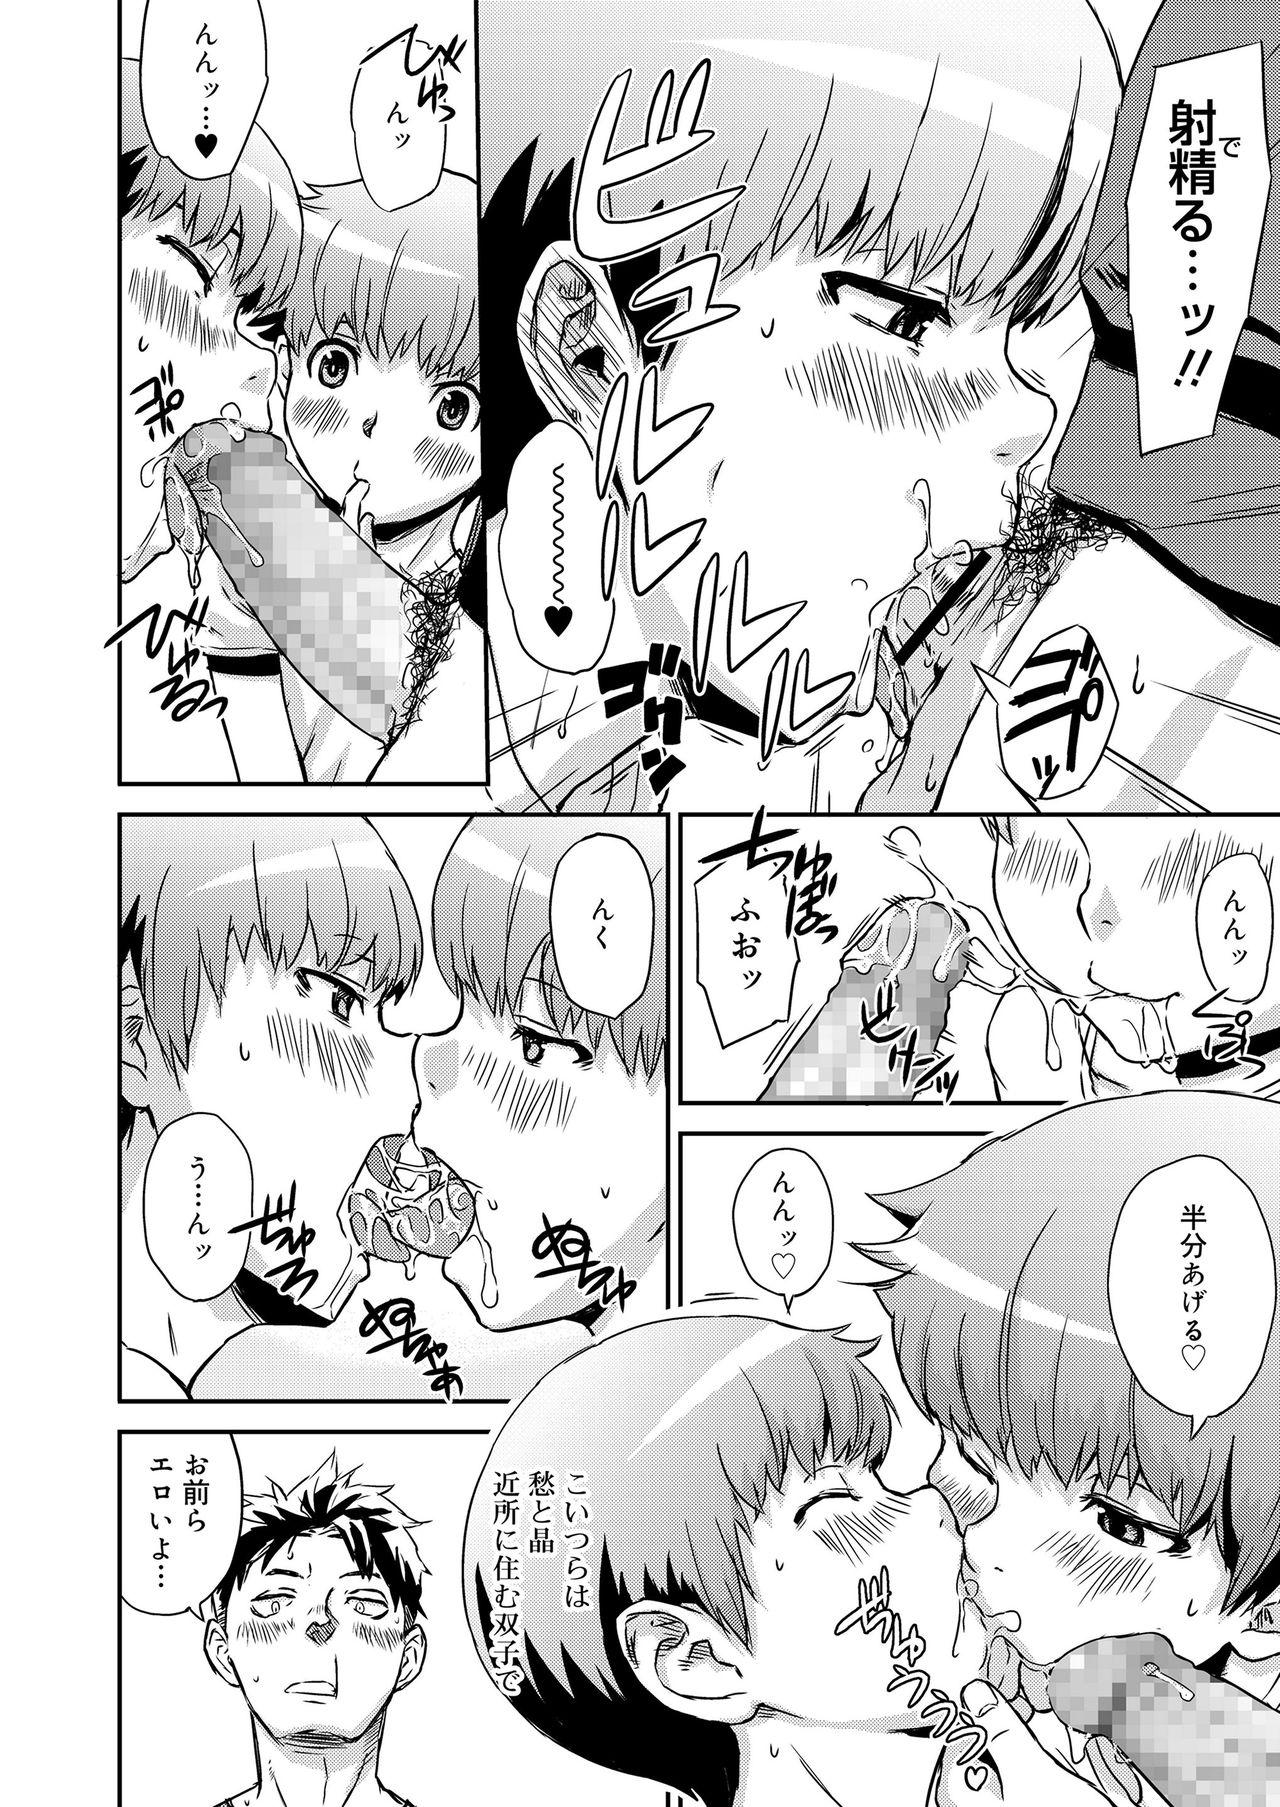 Bald Pussy Inkou Shounen Old Vs Young - Page 6